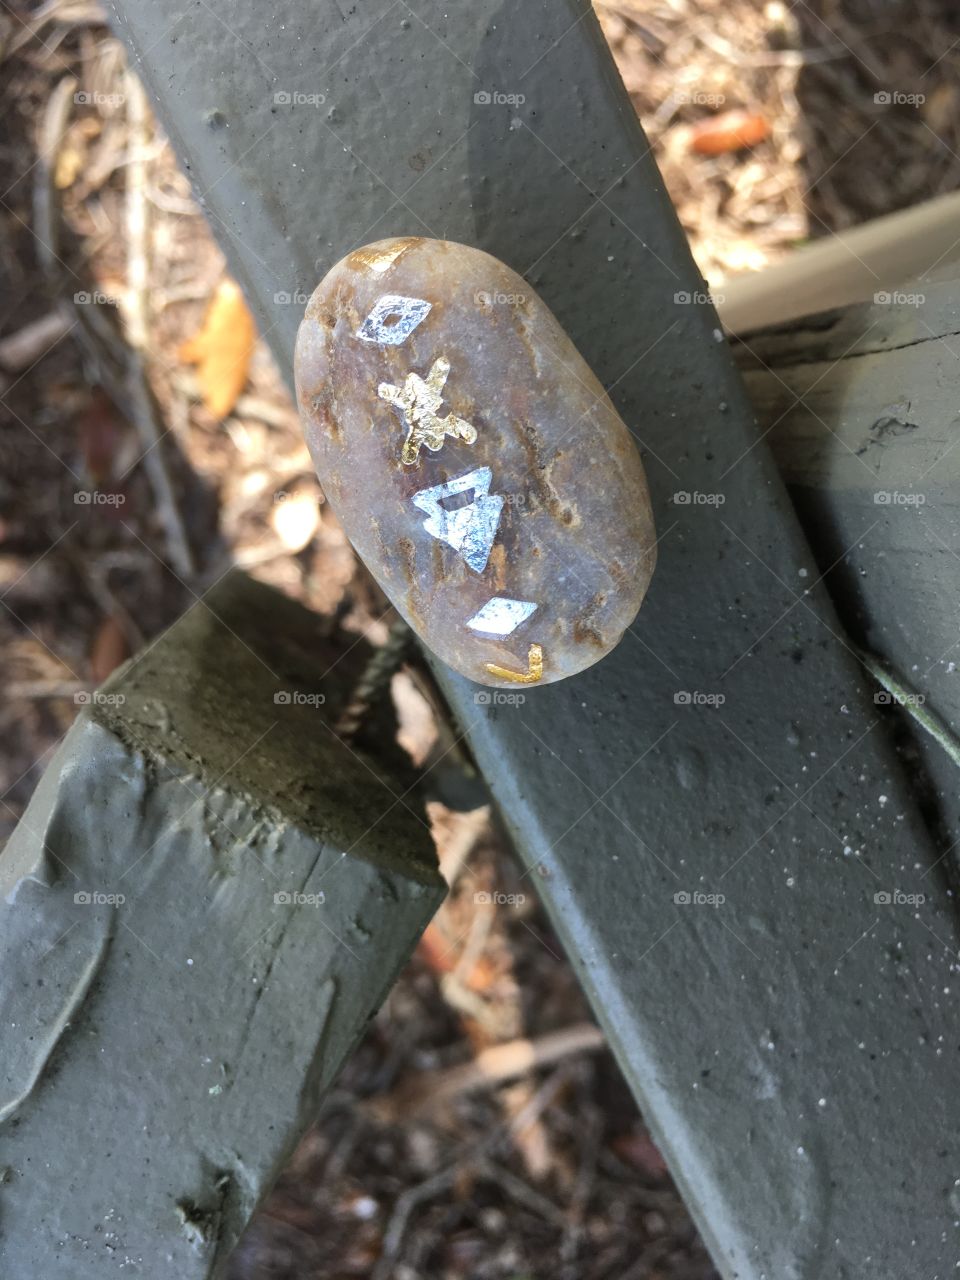 Special rock found on the fence 